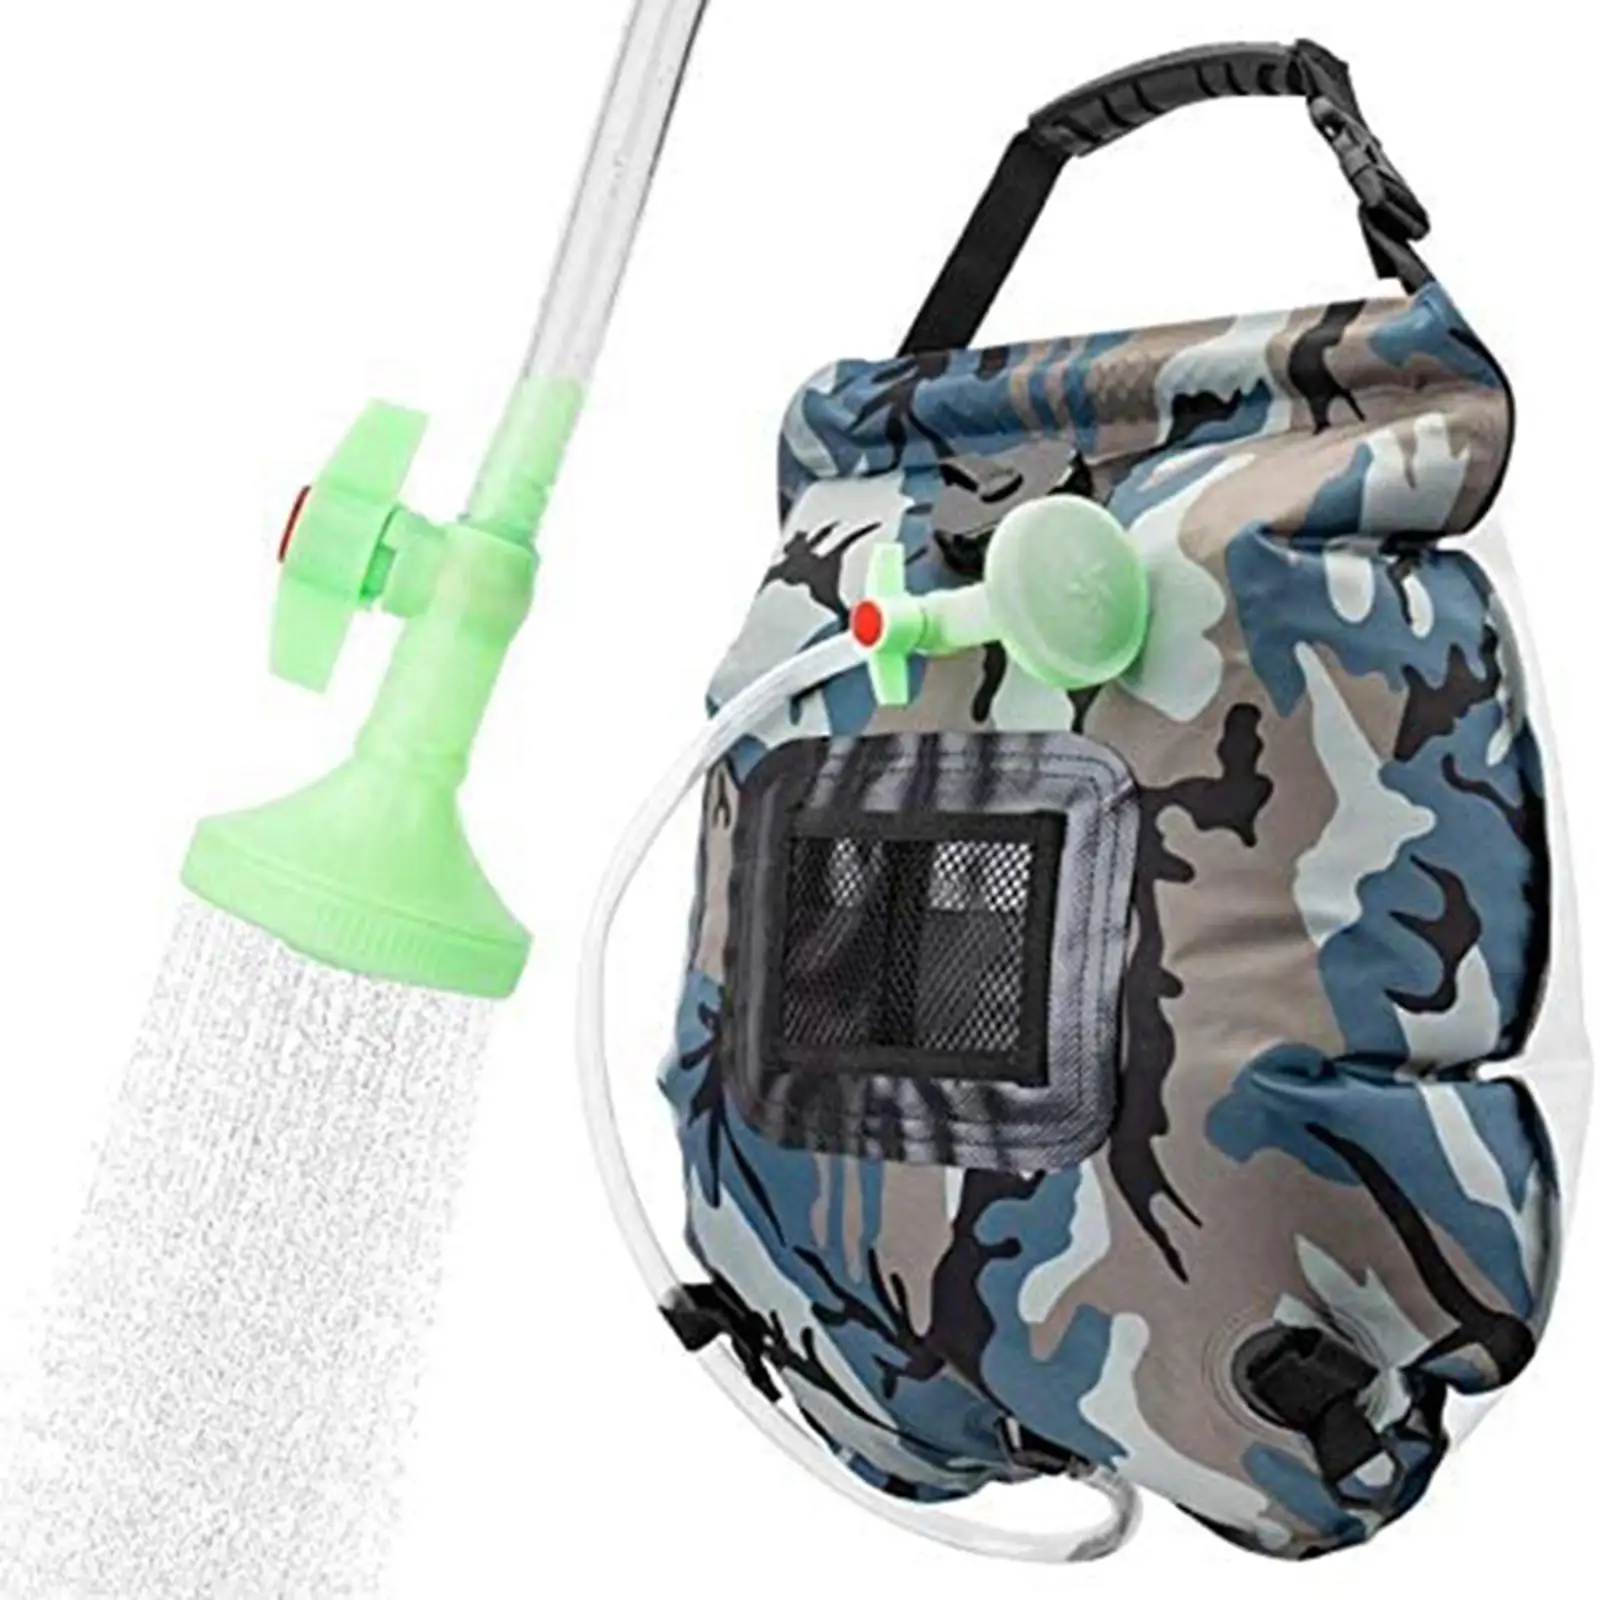 Large Outdoor Shower Bag with Removable Hose Heated Solar Power Folded 5gallons/20L for Fishing Traveling Bathing Climbing